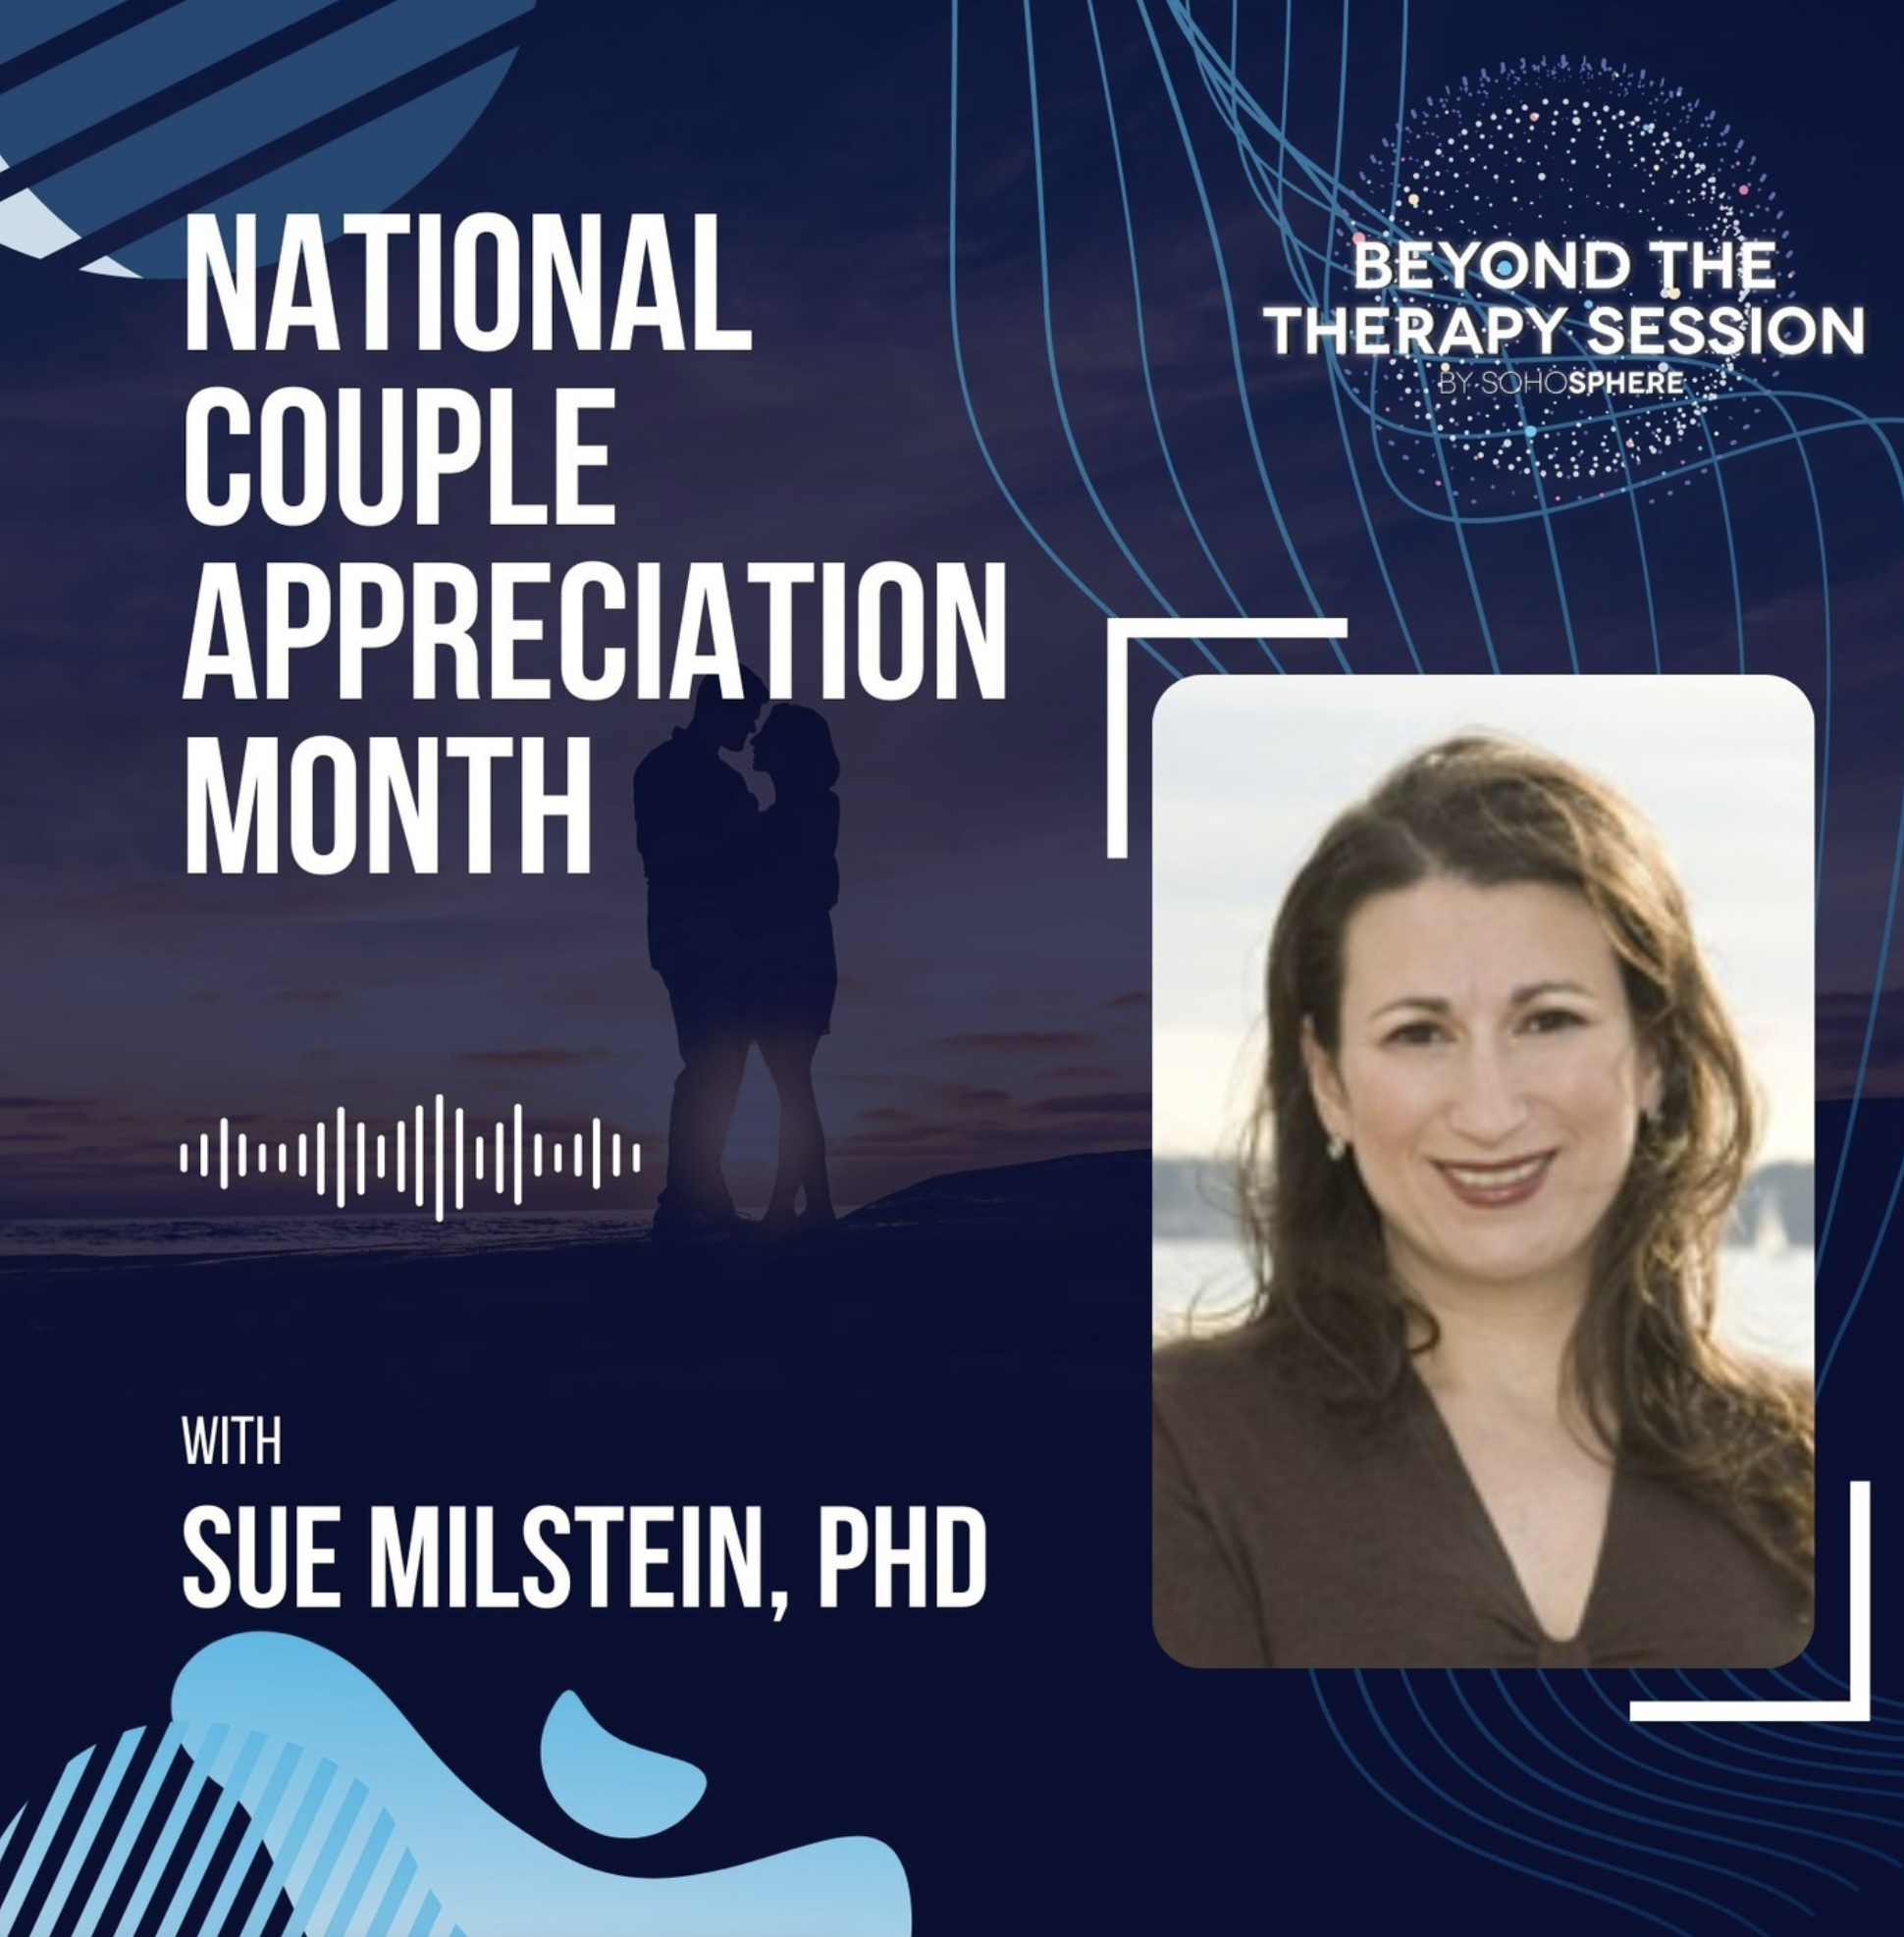 National Couple Appreciation Month with Susan Milstein, PHD